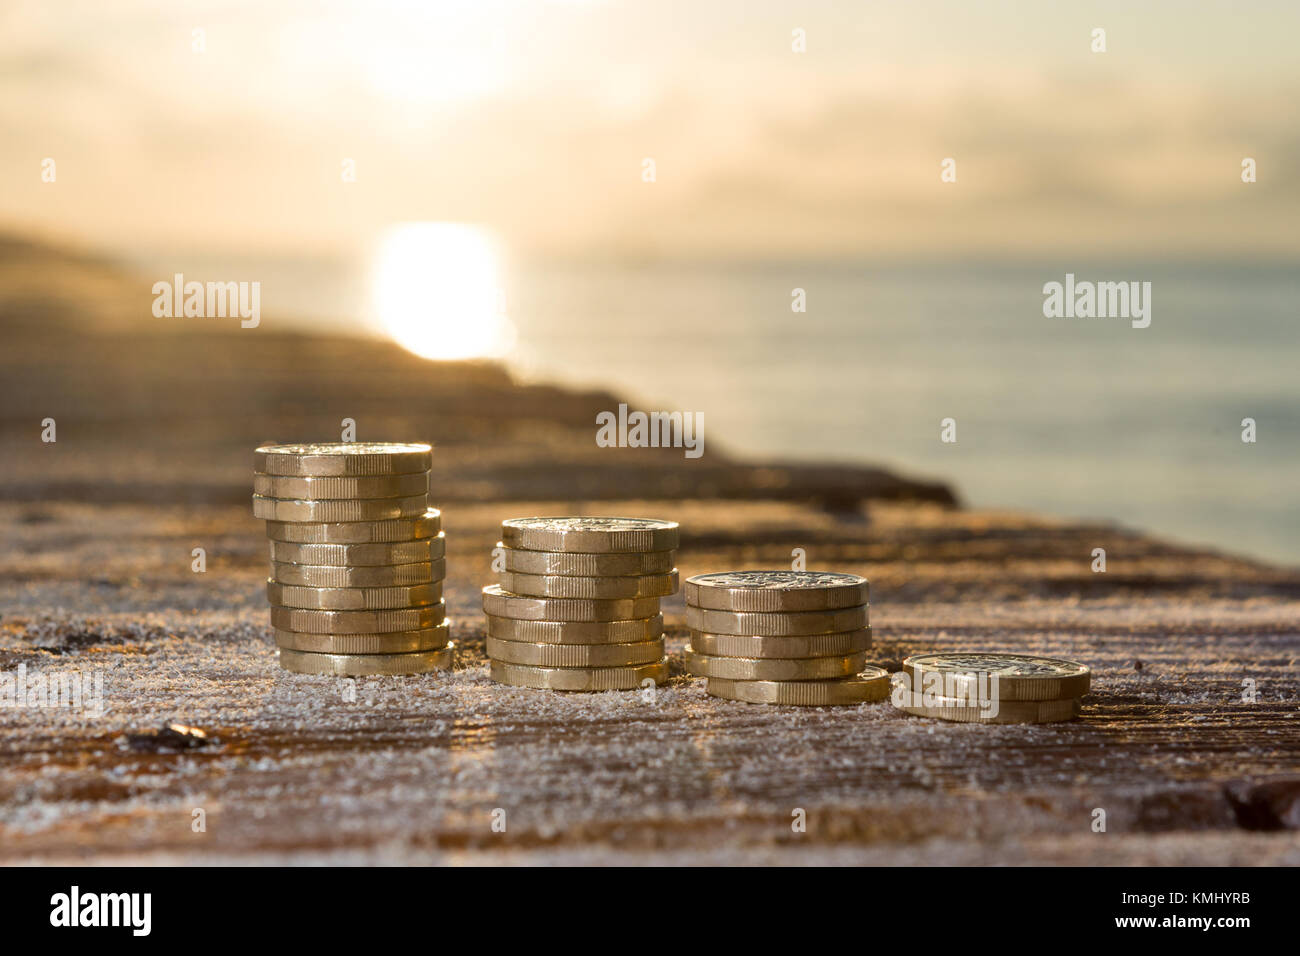 British Money, Pound Coins in Rising Stacks on Sandy Wood. New Pounds in a Warm Sunrise Light. Stock Photo